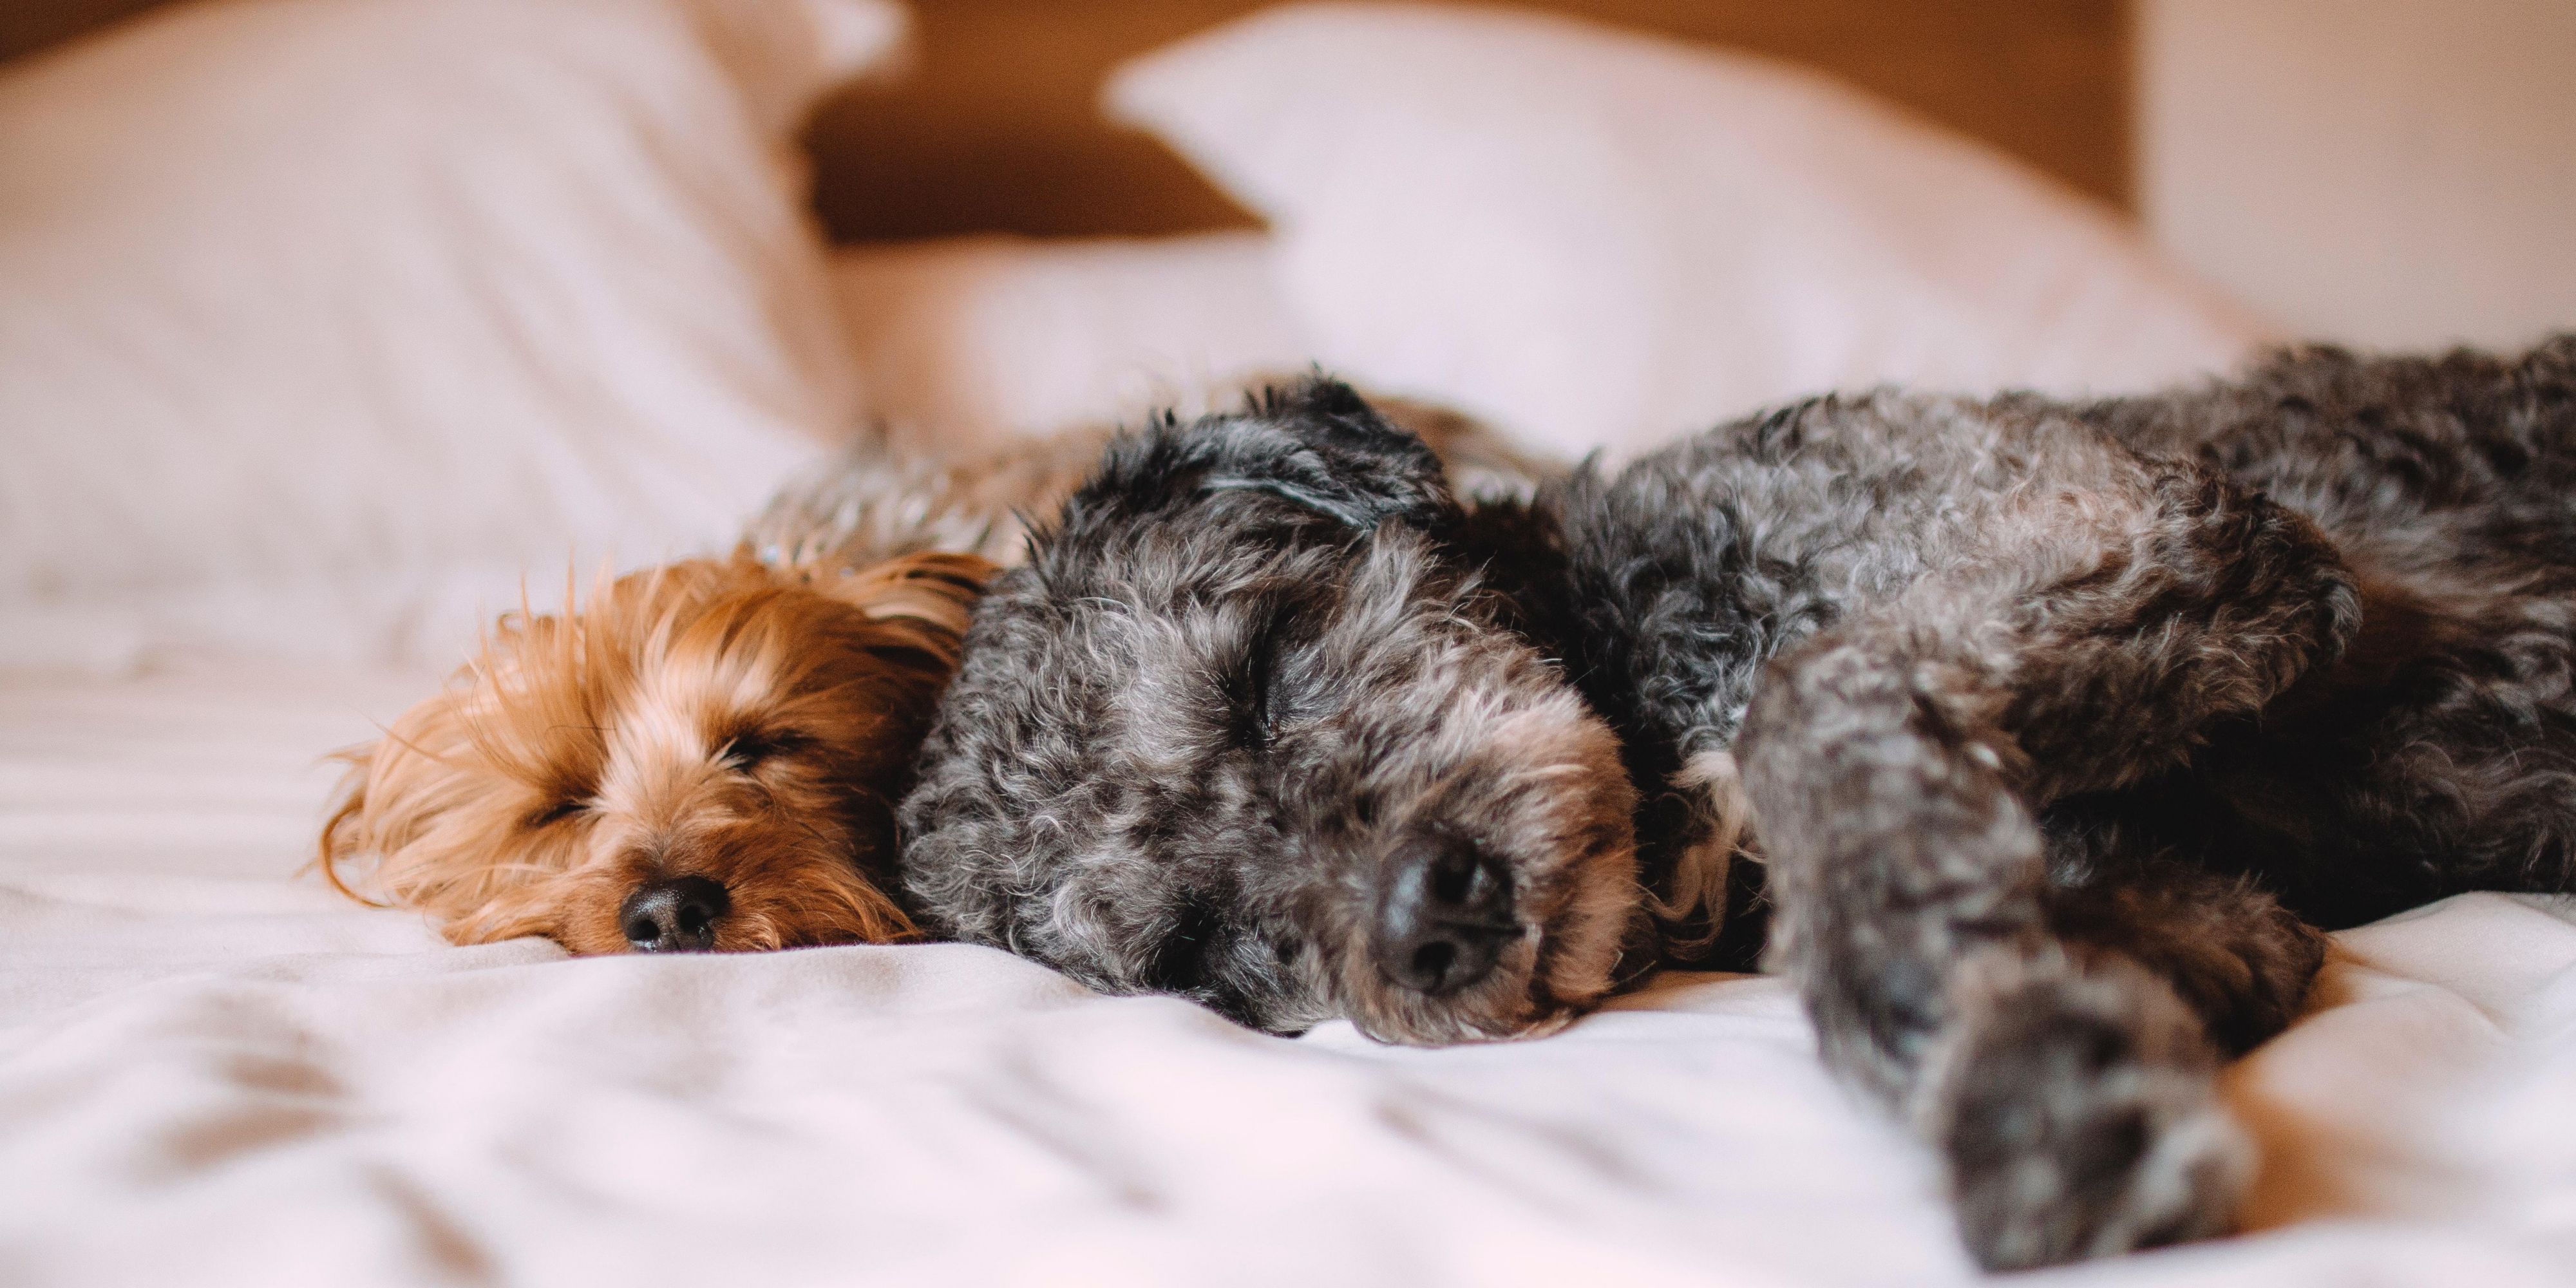 Bring your pup to the Holiday Inn Express Eugene Springfield! 

Our Pet Deposit is $20. We have a 2 dog maximum. 

Please contact us with any other questions! 